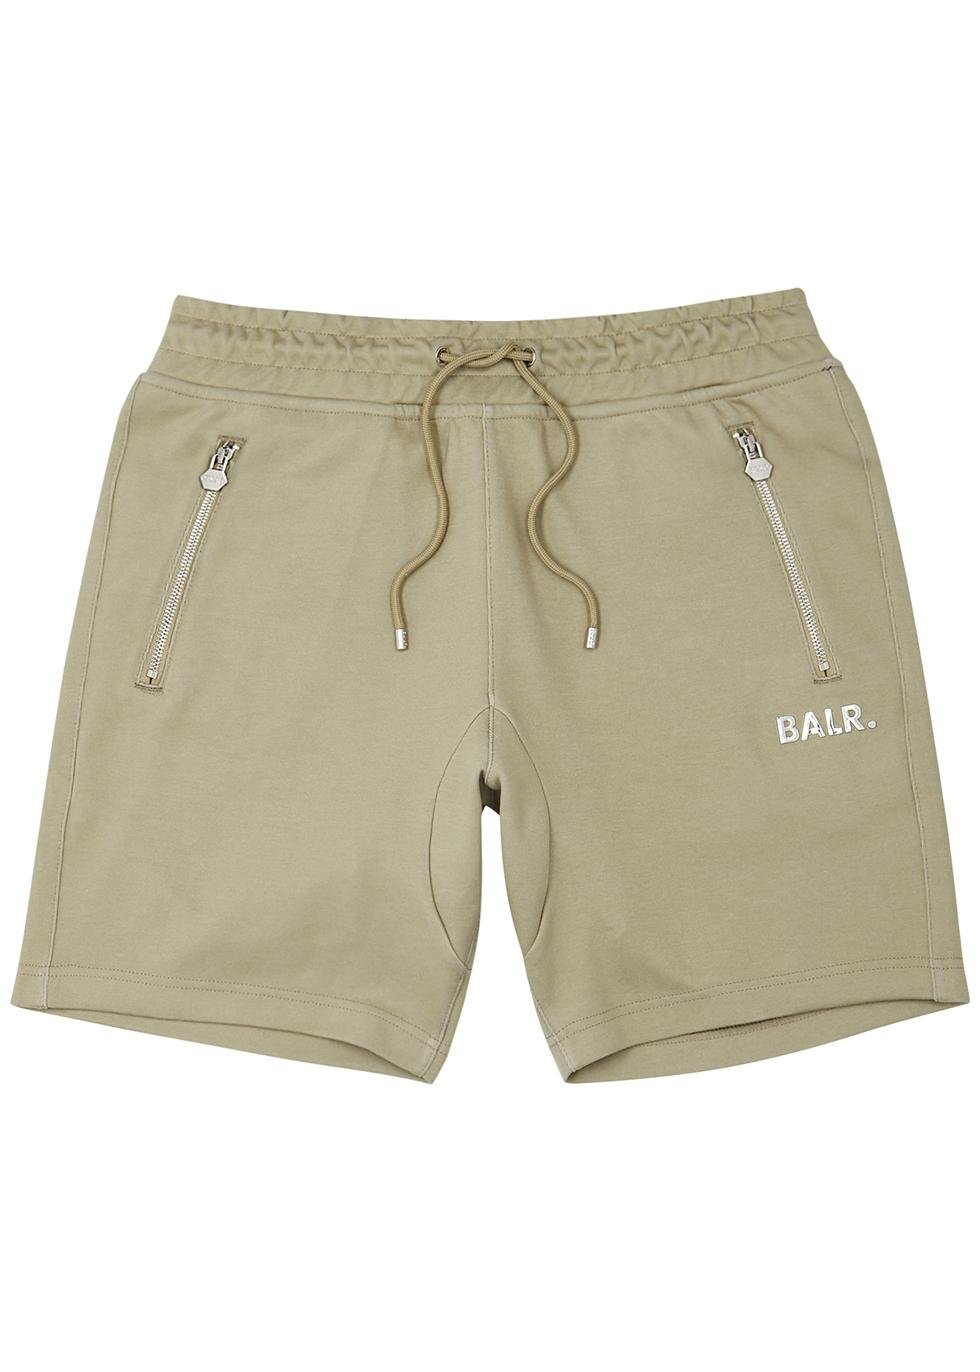 Q.Series green jersey shorts by BALR.